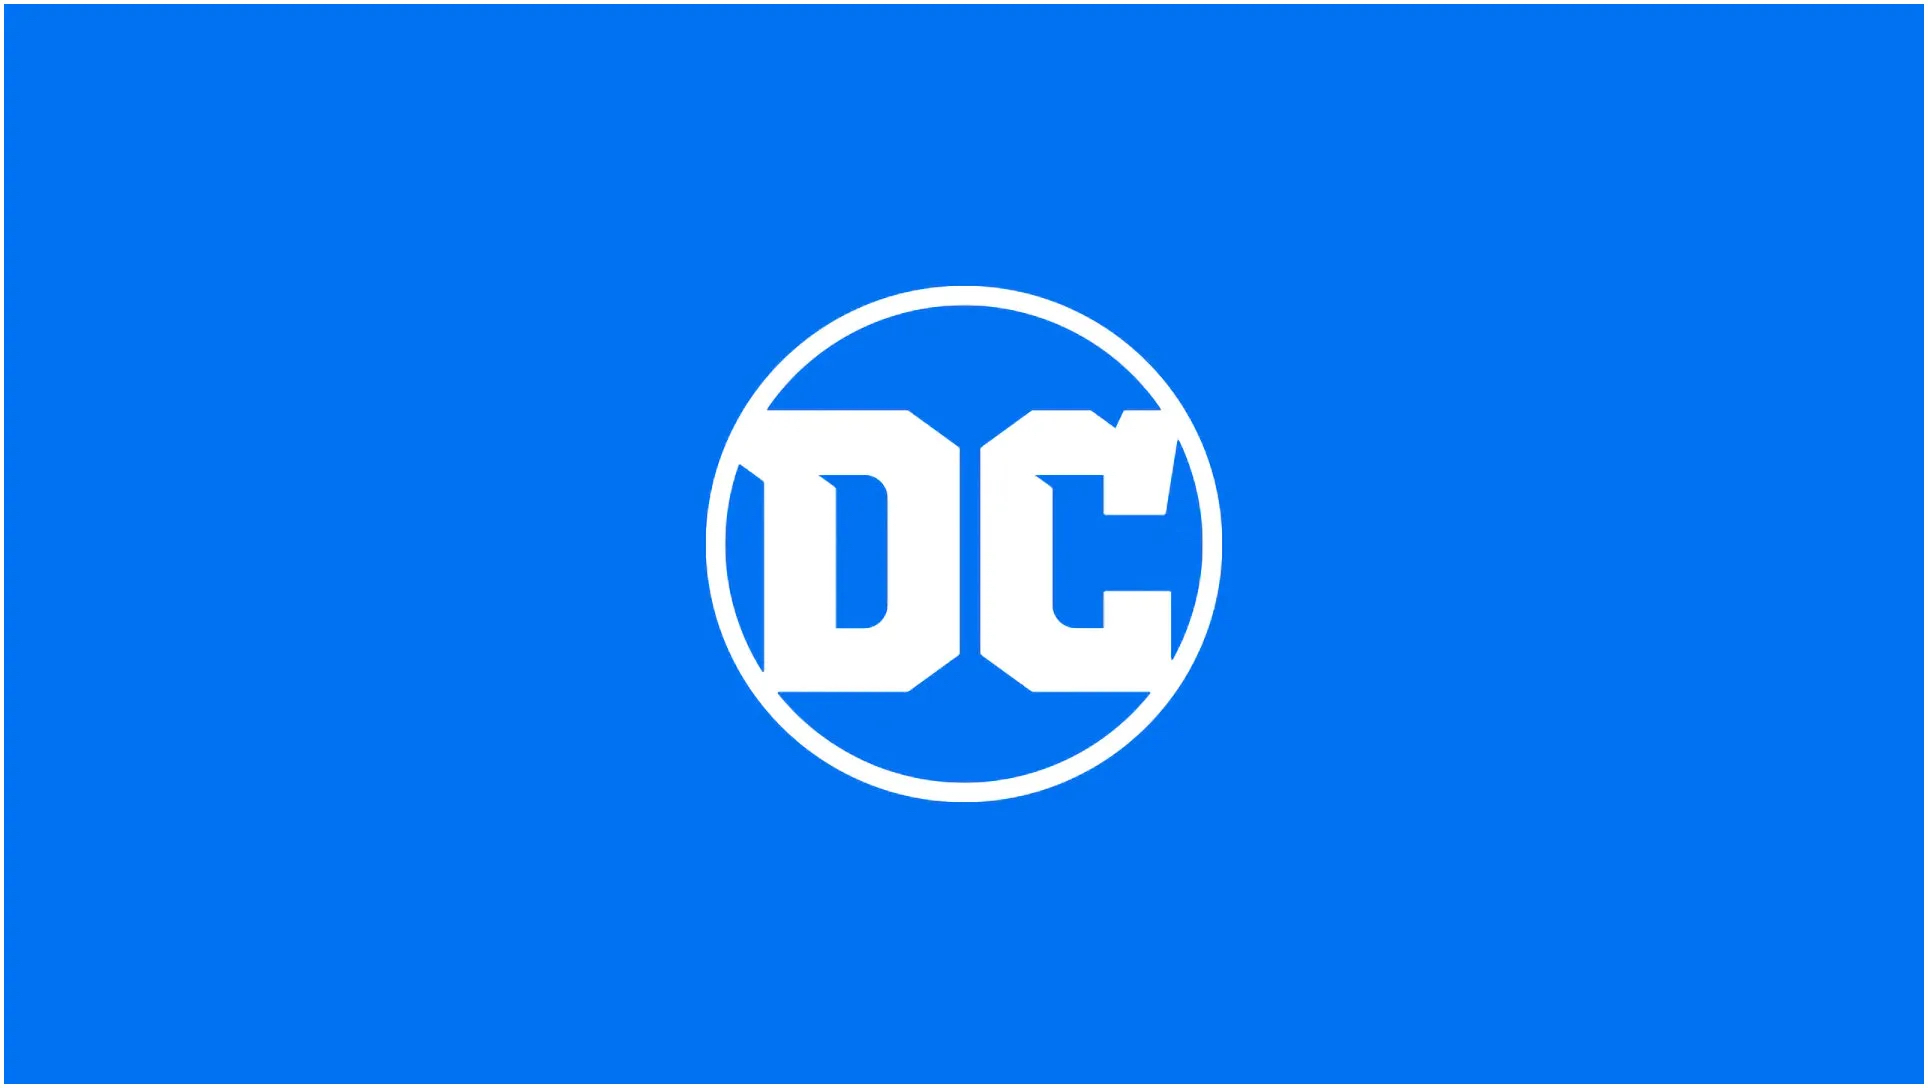 DC Comics announces SDCC 2023 Booth details, panels, screenings, and more